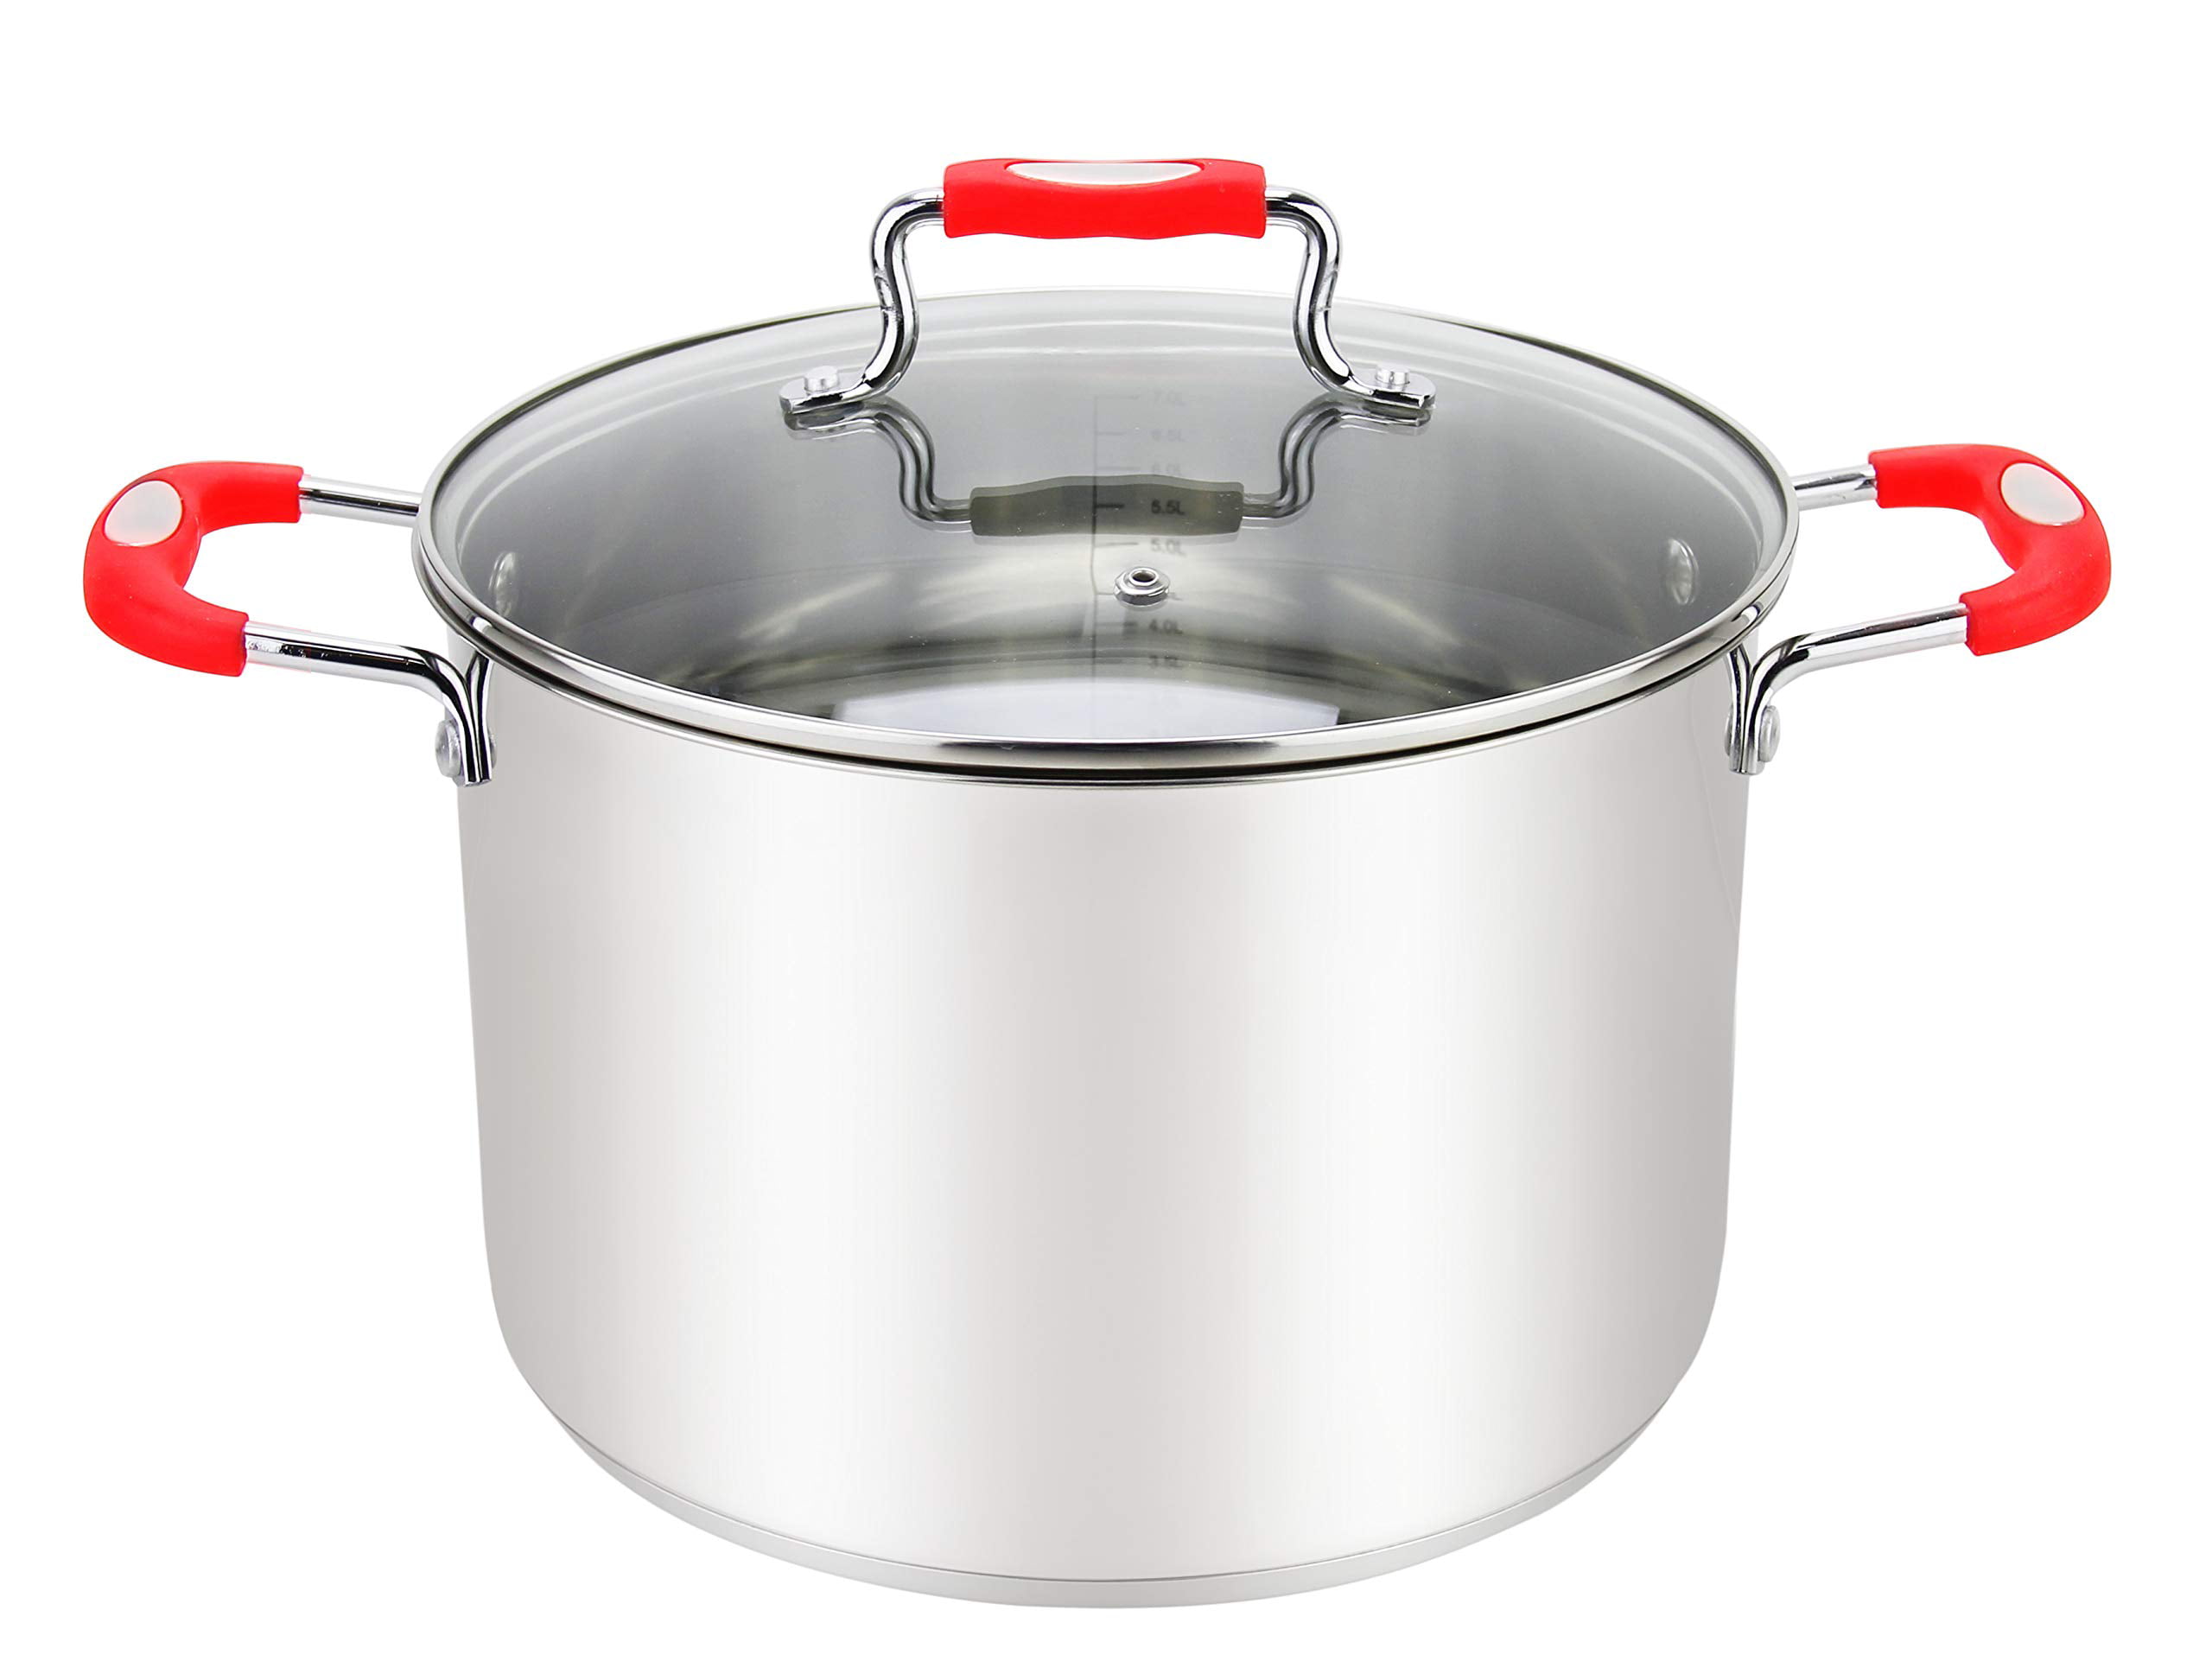 Stockpot ONEISALL 4 Quart Stock Pot Thicker Stainless Steel Large Pot with Lid Oven Large Capacity Gas Stoves Anti-Scalding Safety Handle and Fast Heating for Induction Cooktop 